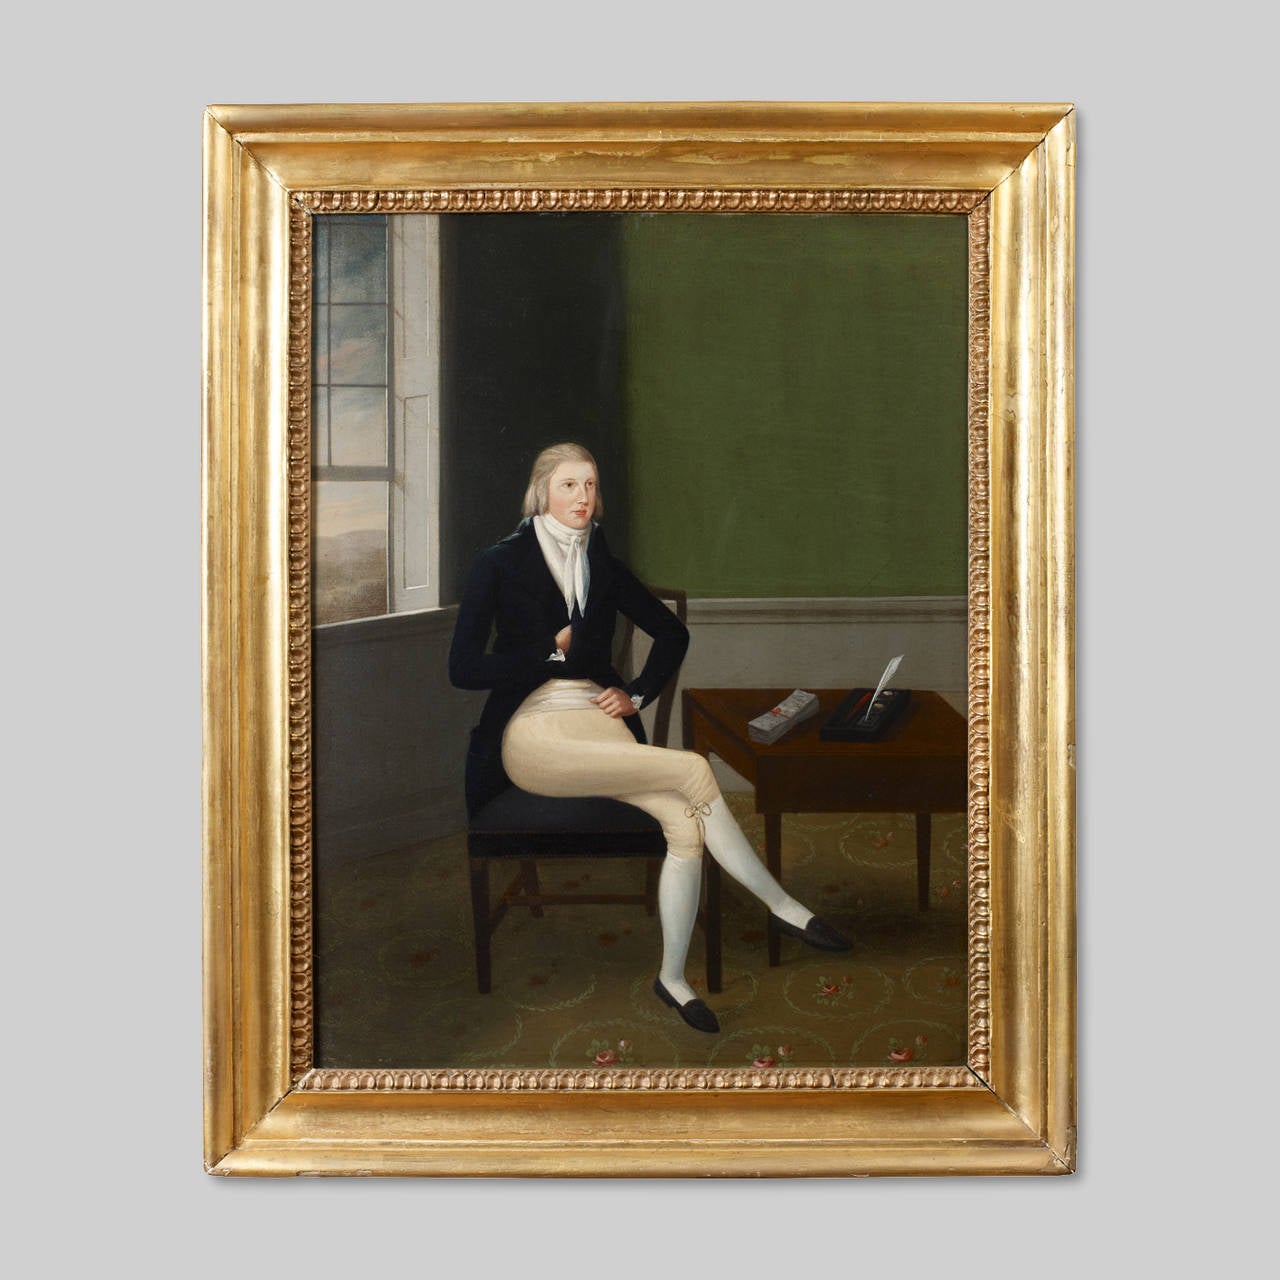 Portrait of John James Stewart,
circa 1800.
Oil on mahogany panel.
Condition: Excellent condition, very minor scattered in-paint along edges of panel. Possibly in original frame.
Measures: 25 7/8